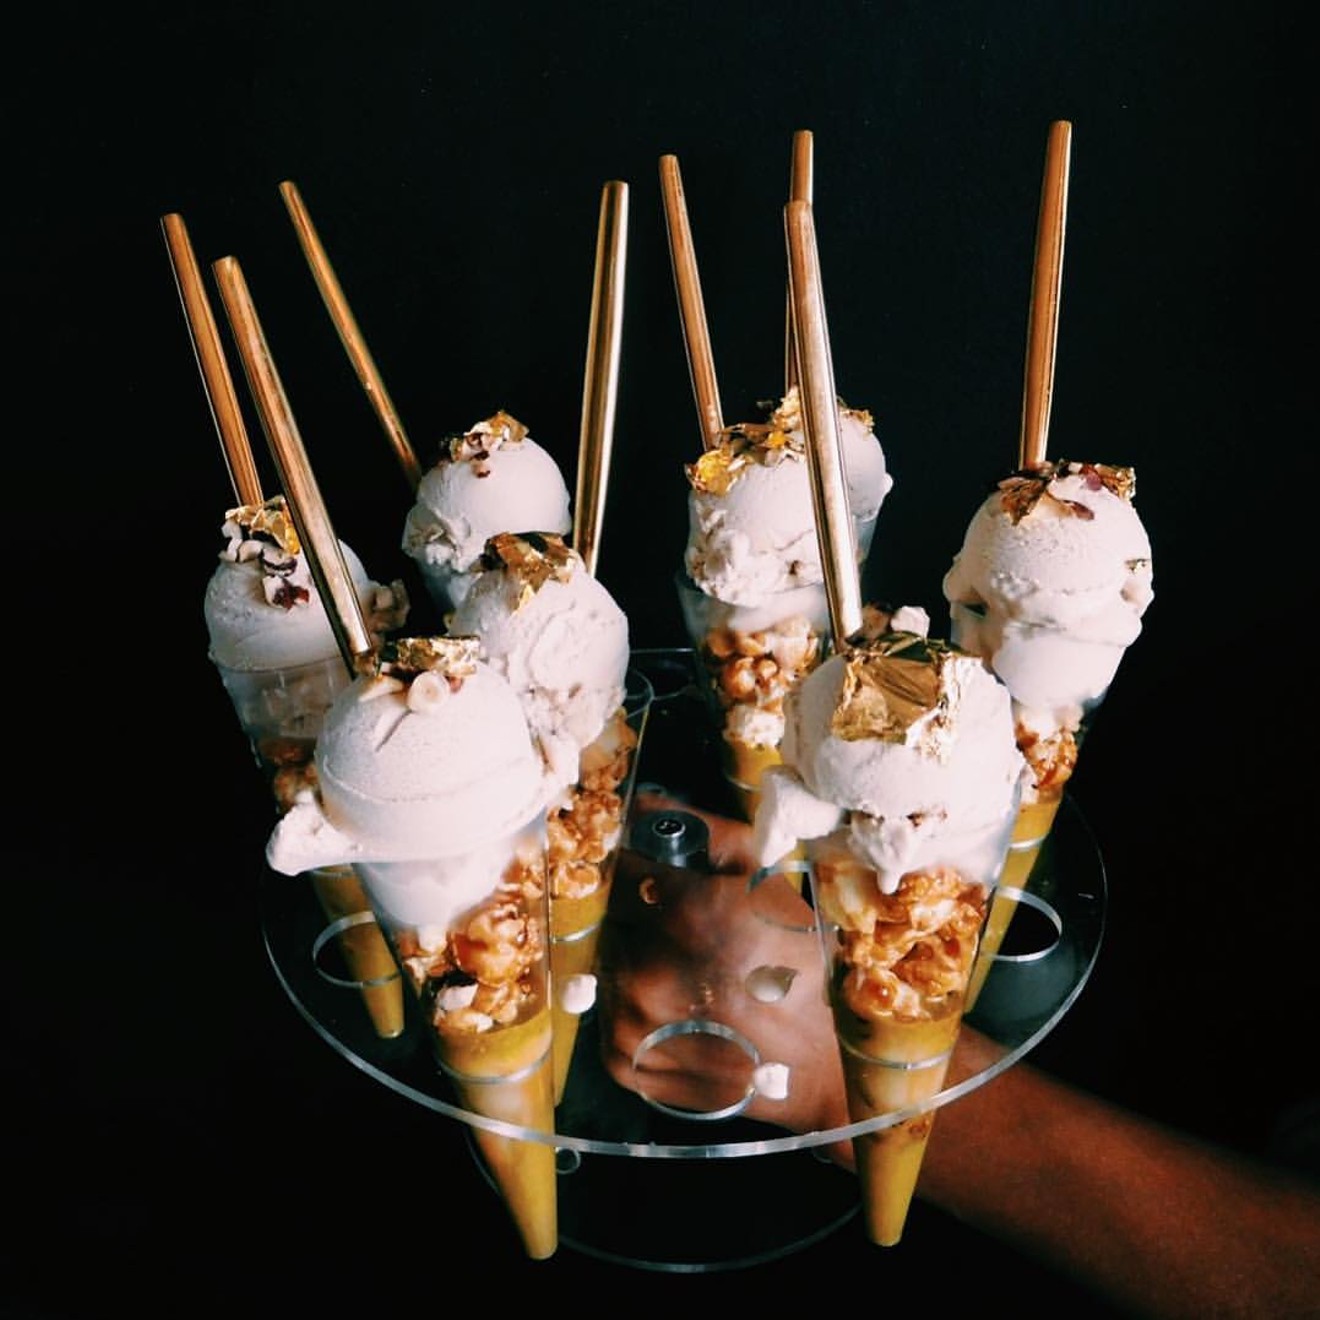 From one of Ice Cream Wasted's tasting menus: organic coconut milk ice cream with white chocolate, cream soda, white fudge and vanilla bourbon bean atop a cone filled with roasted hazelnuts and 24-karat gold and topped ridiculously with 24-karat gold hazelnut syrup and brown-buttered popcorn